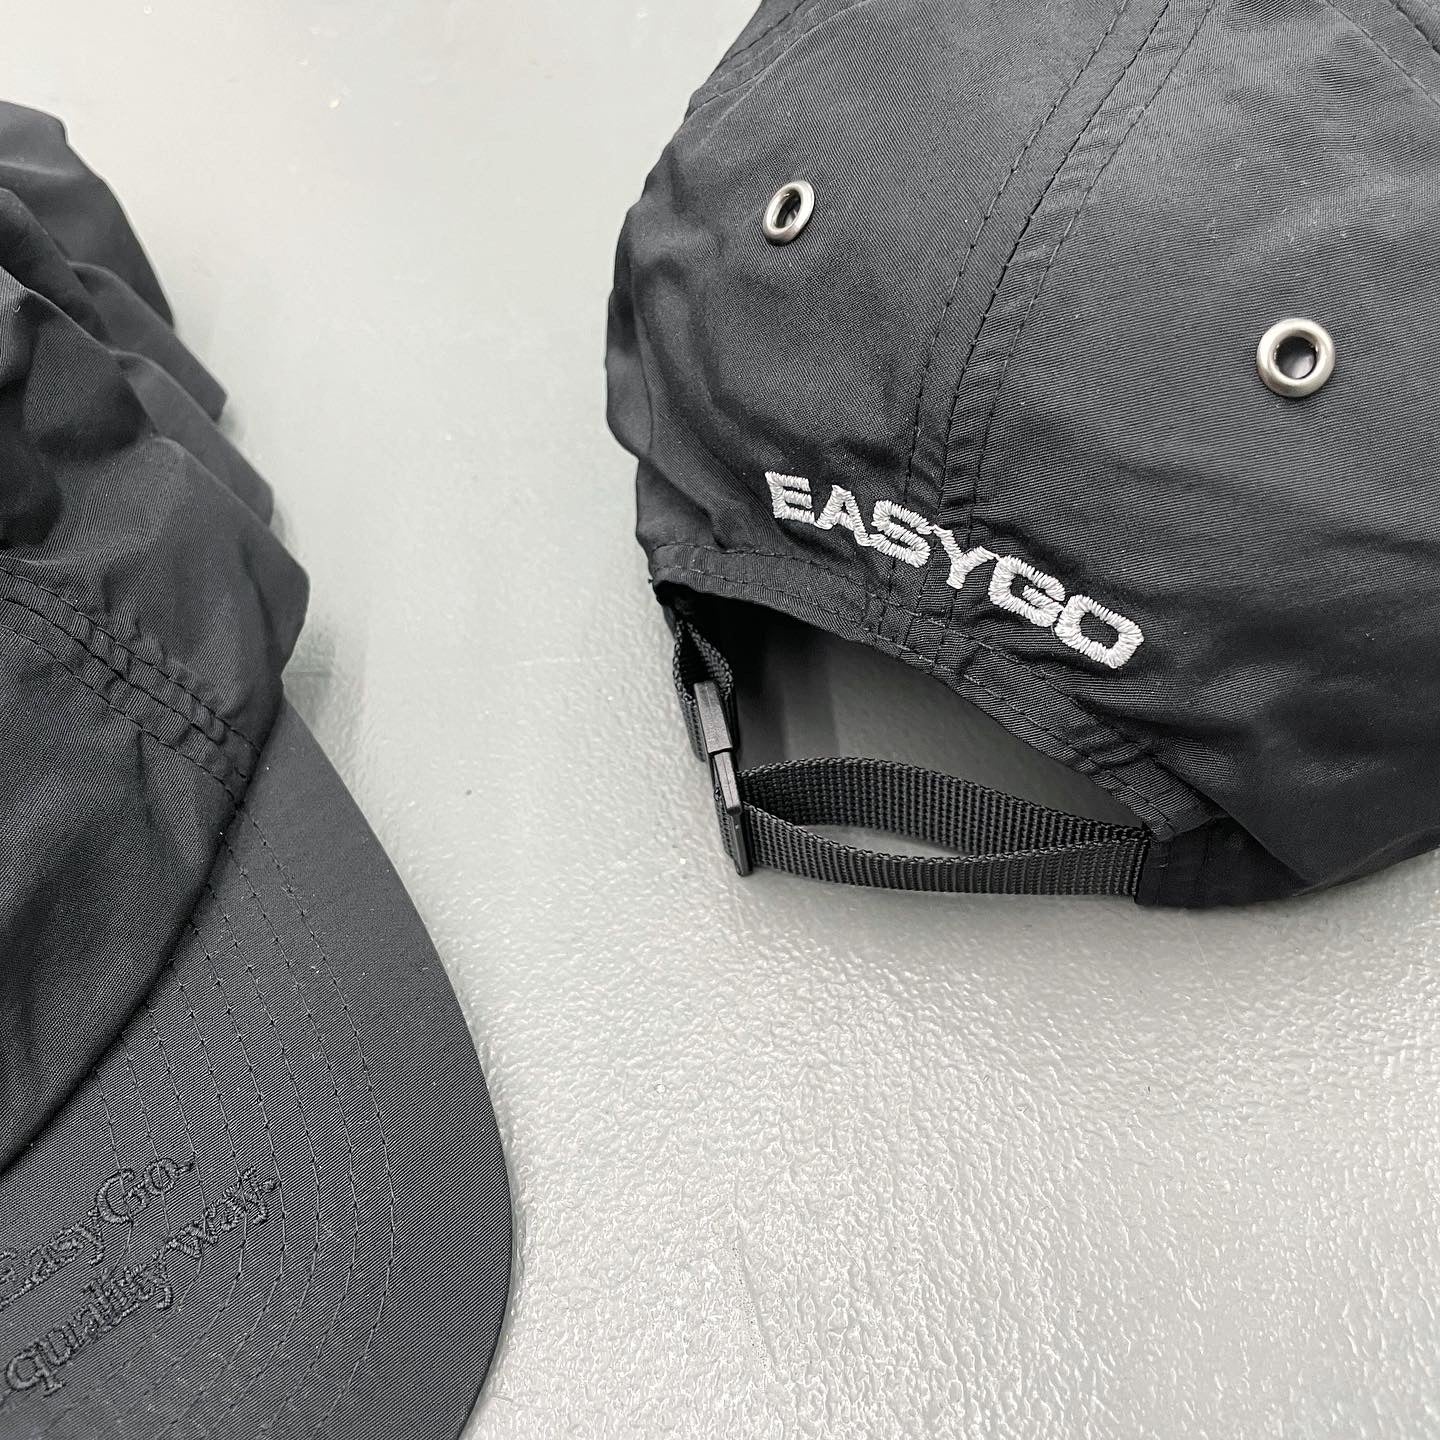 EasyGo Athletics "Safety Meeting" 6 Panel Cap / Chartreuse Suede 4 Panel Cap